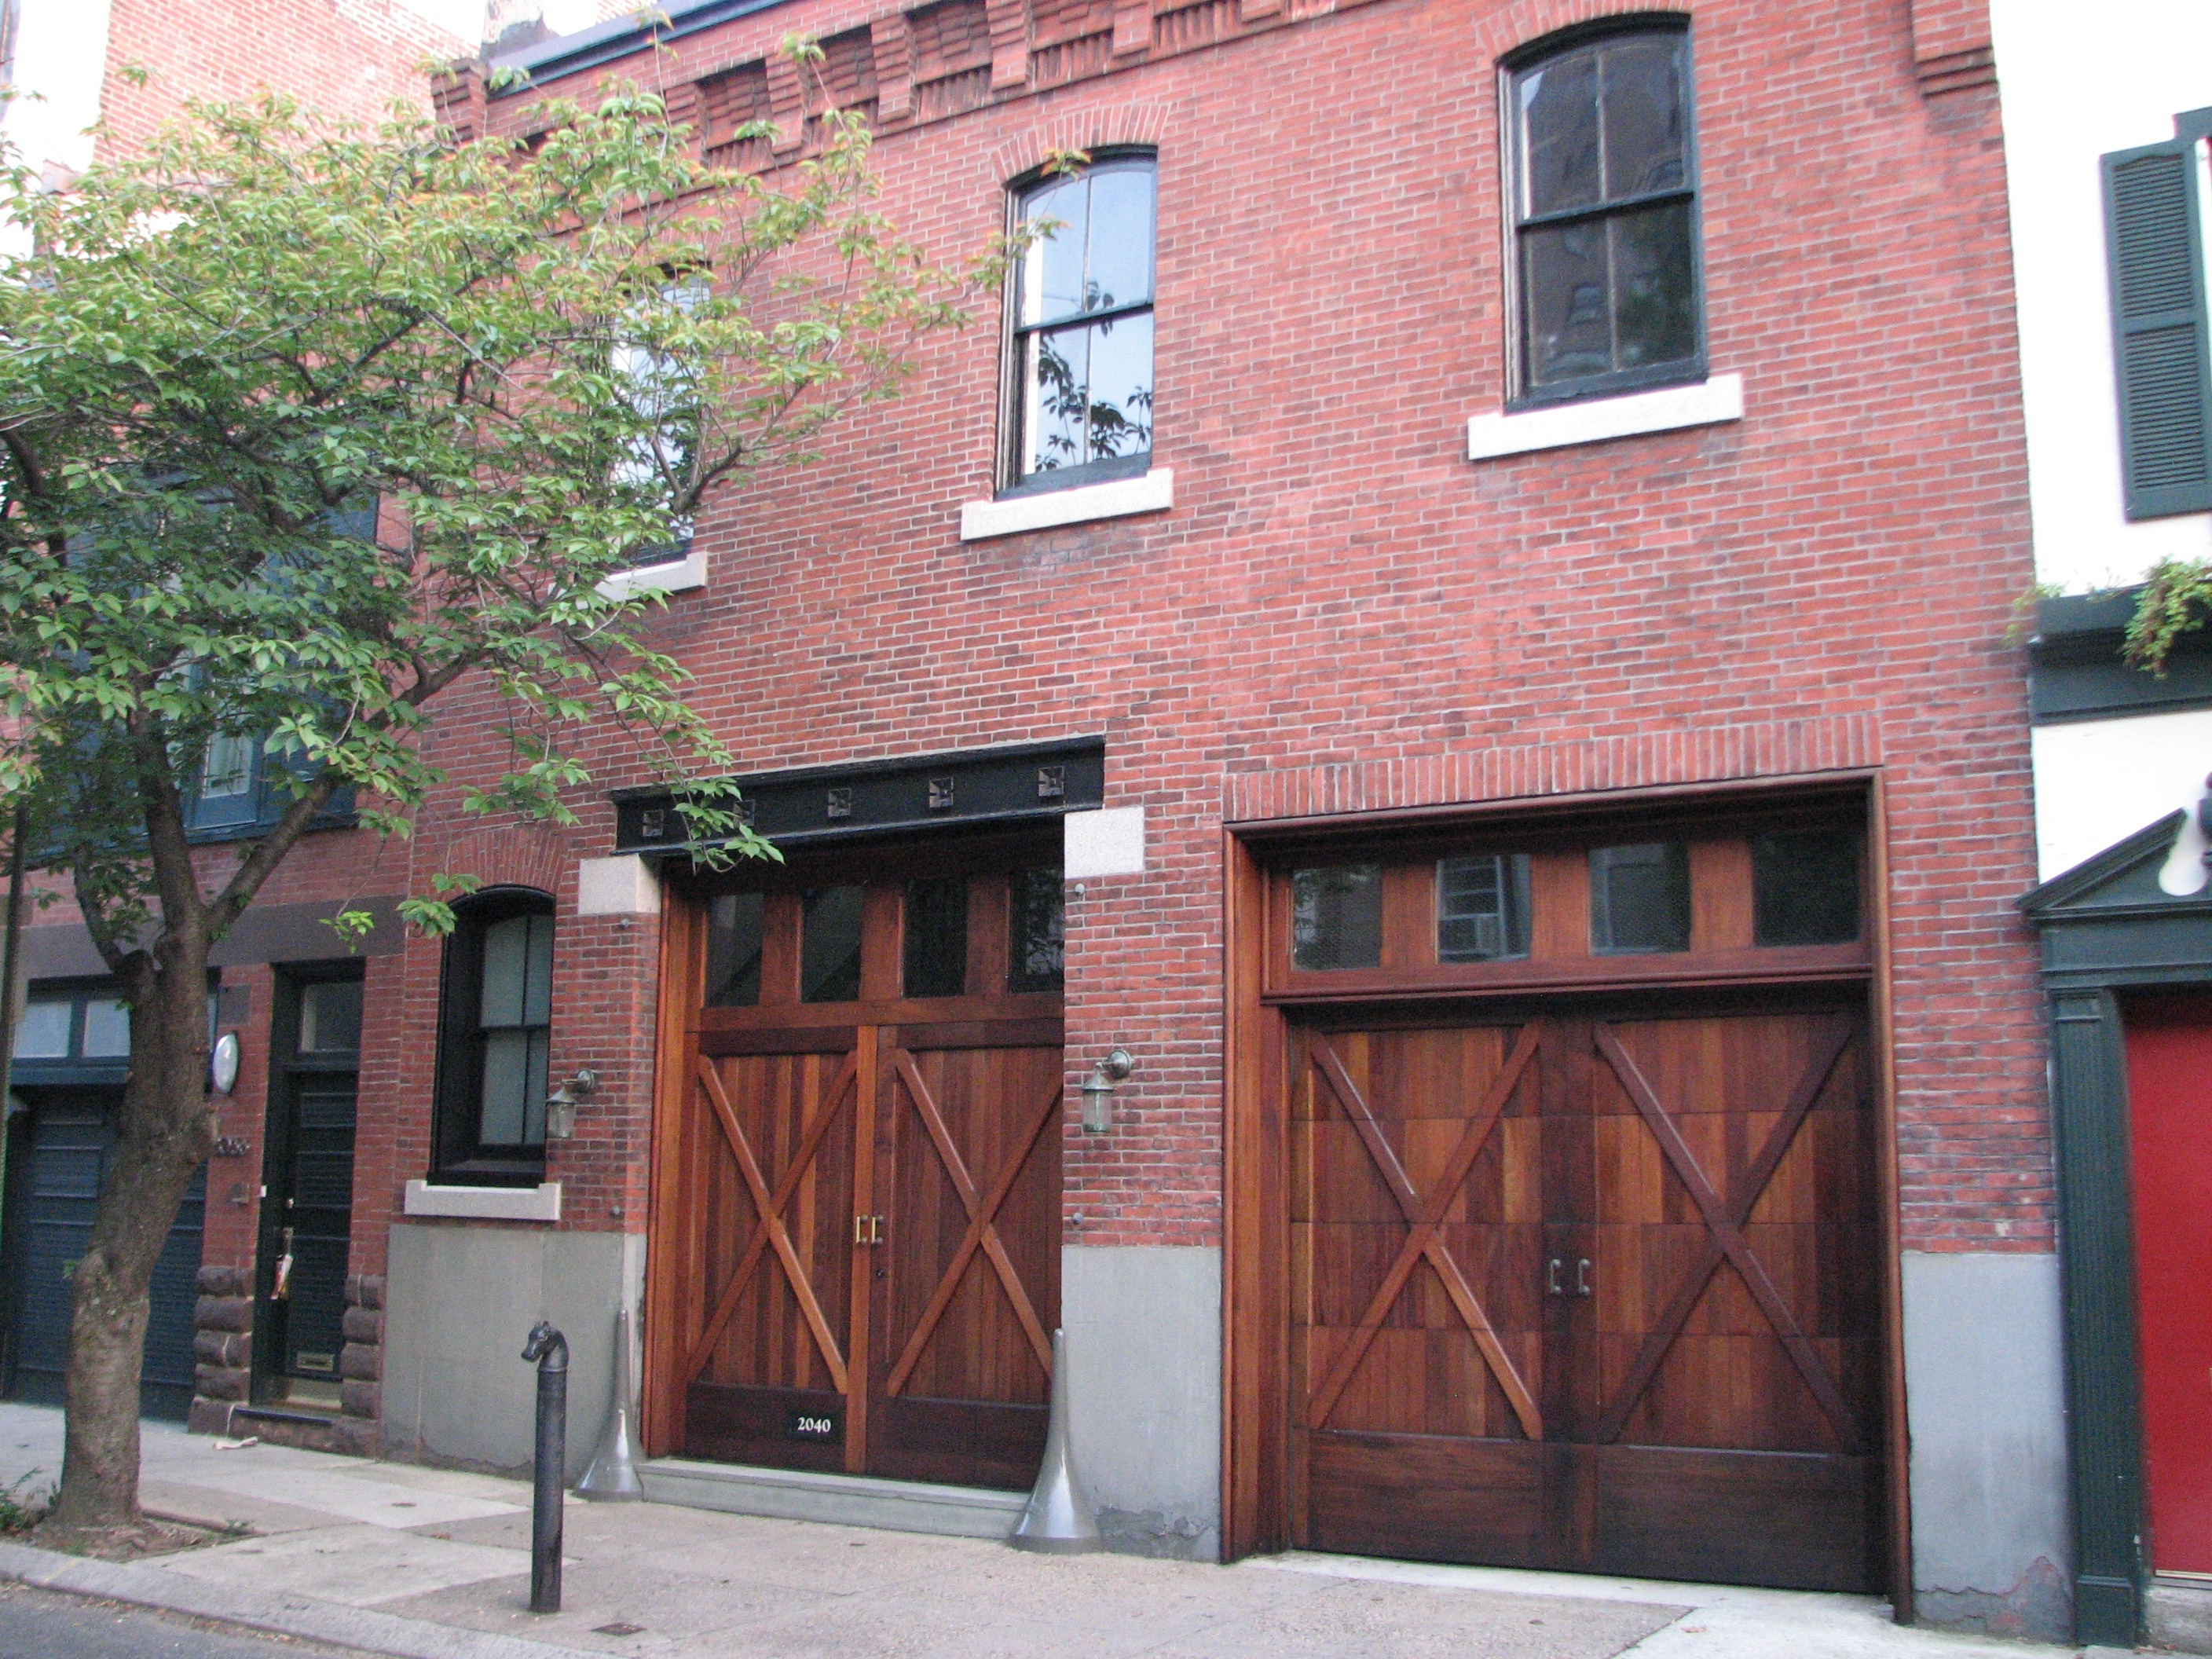 Former stables on the south side of Rittenhouse have been redeveloped as handsome homes.